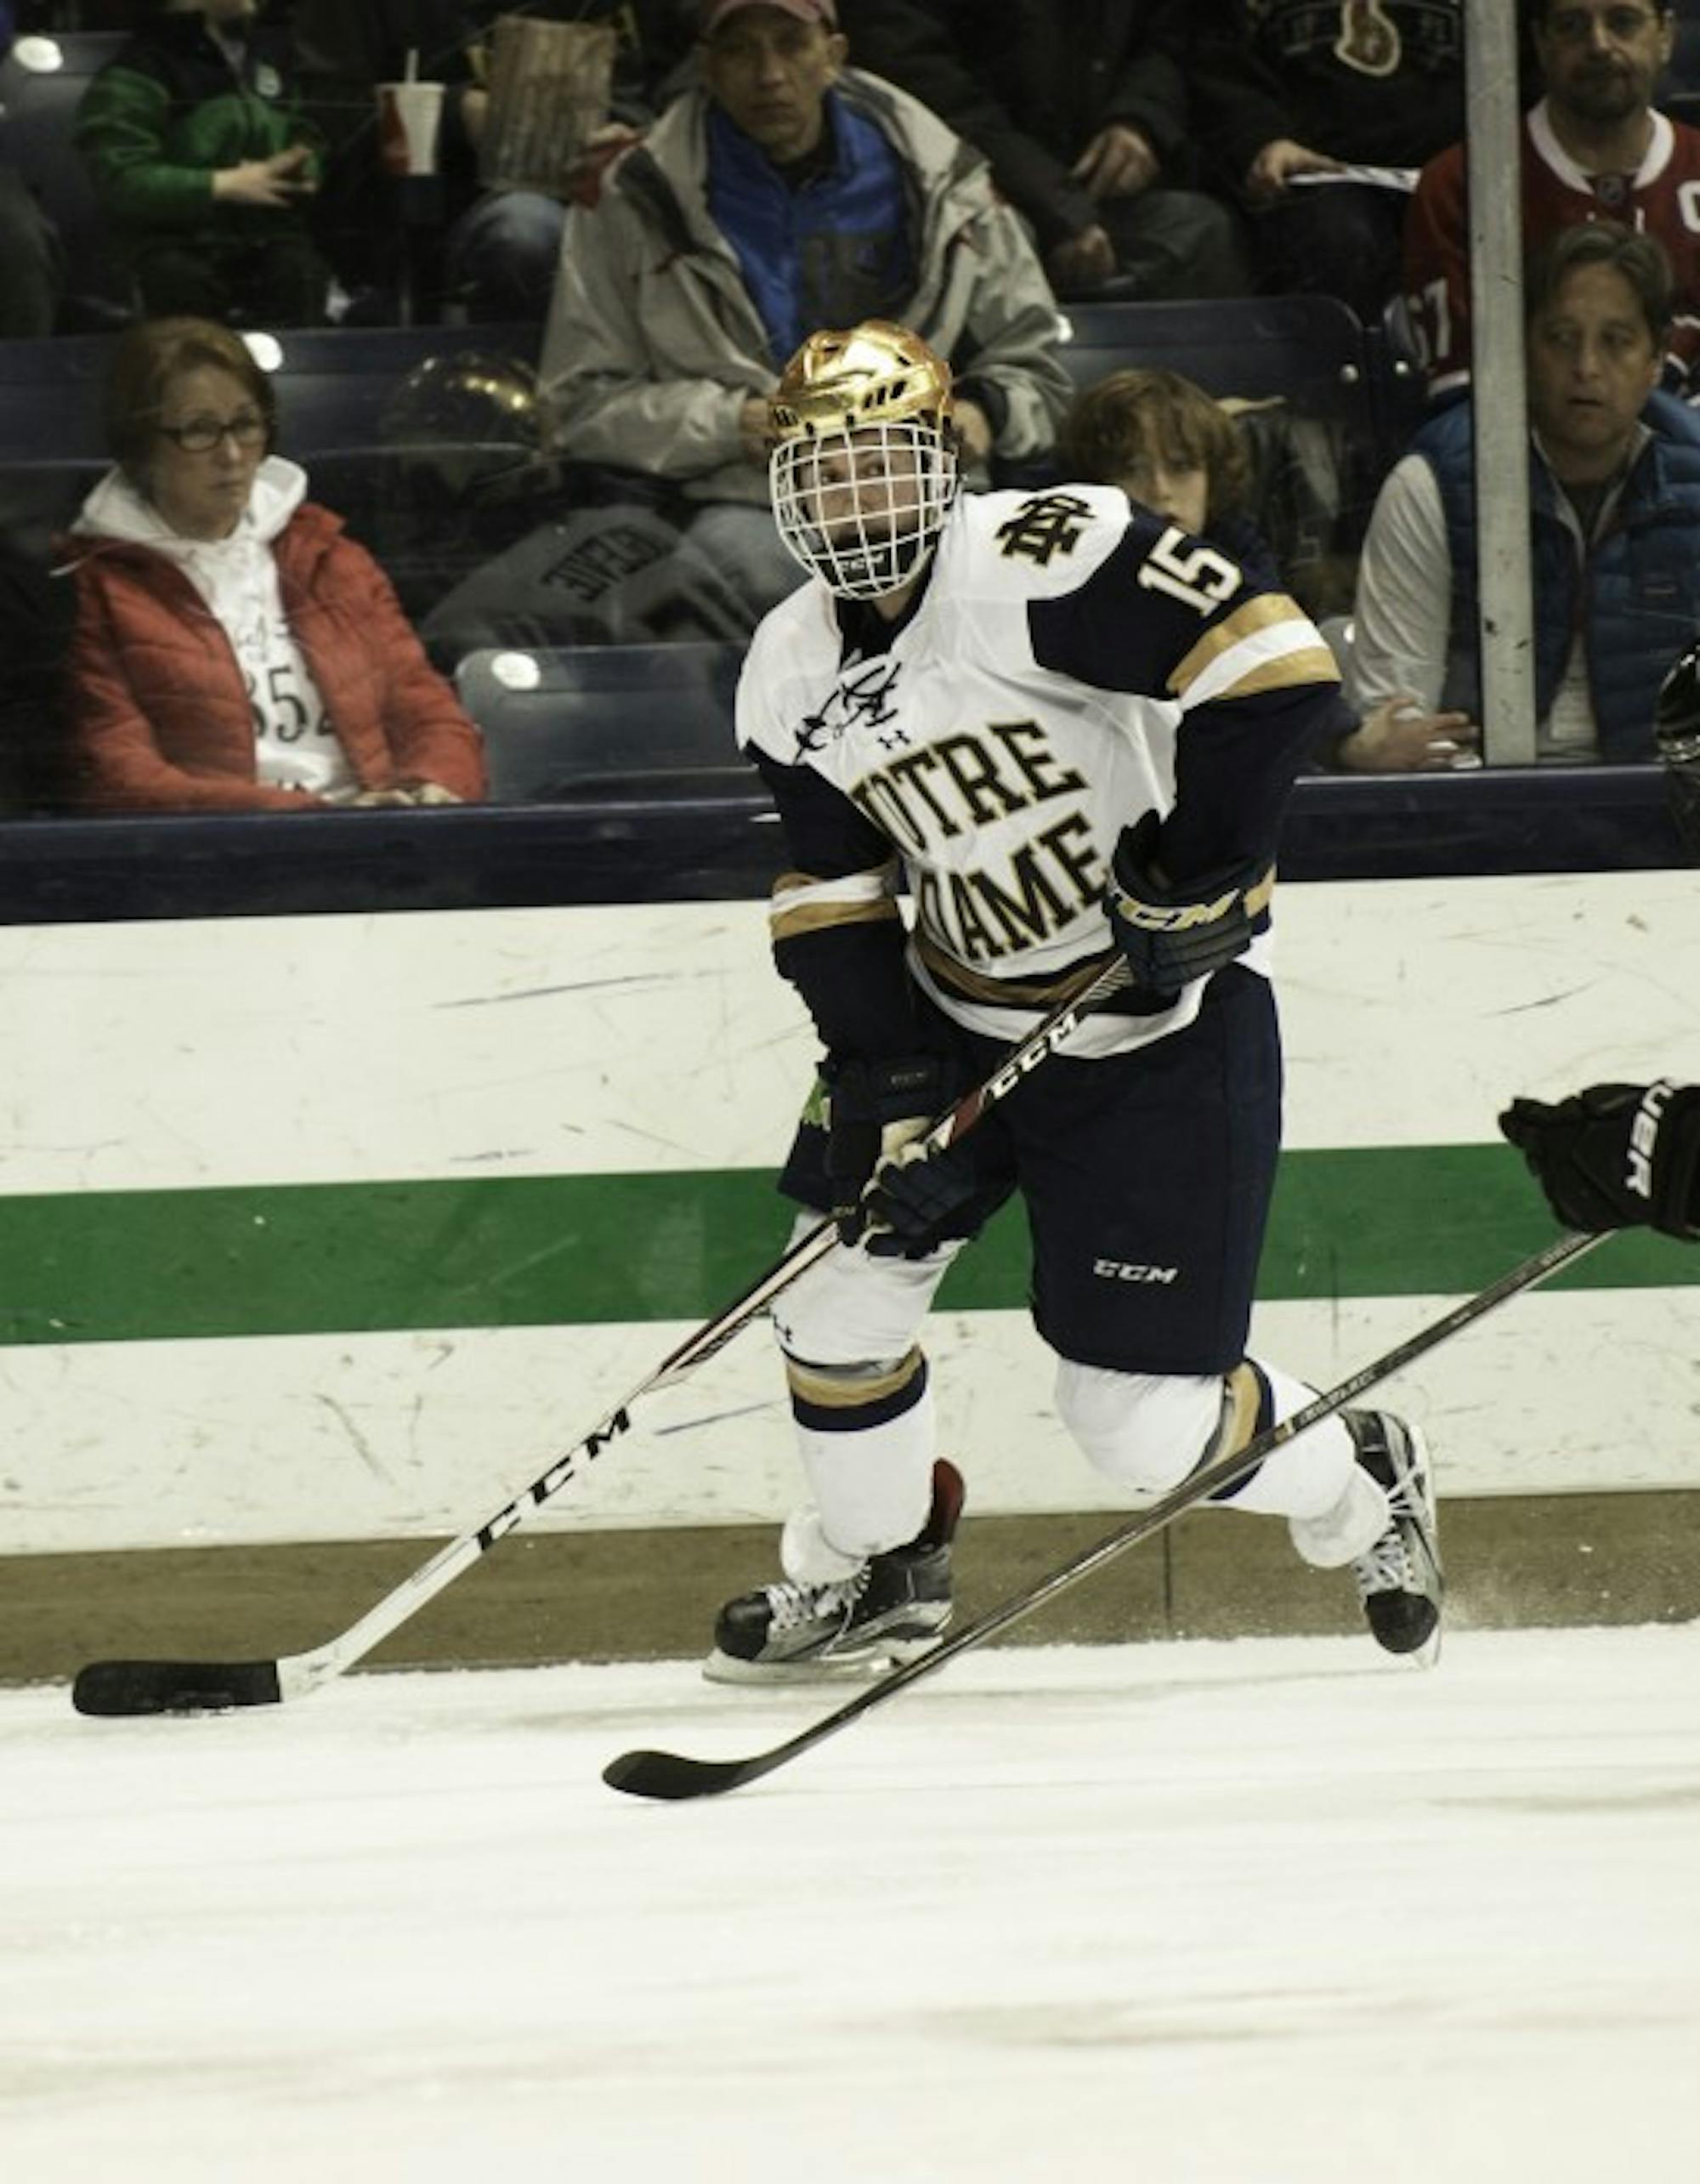 Irish sophomore forward Andrew Oglevie surveys the defense during Notre Dame’s 5-2 win over Providence on March 11.